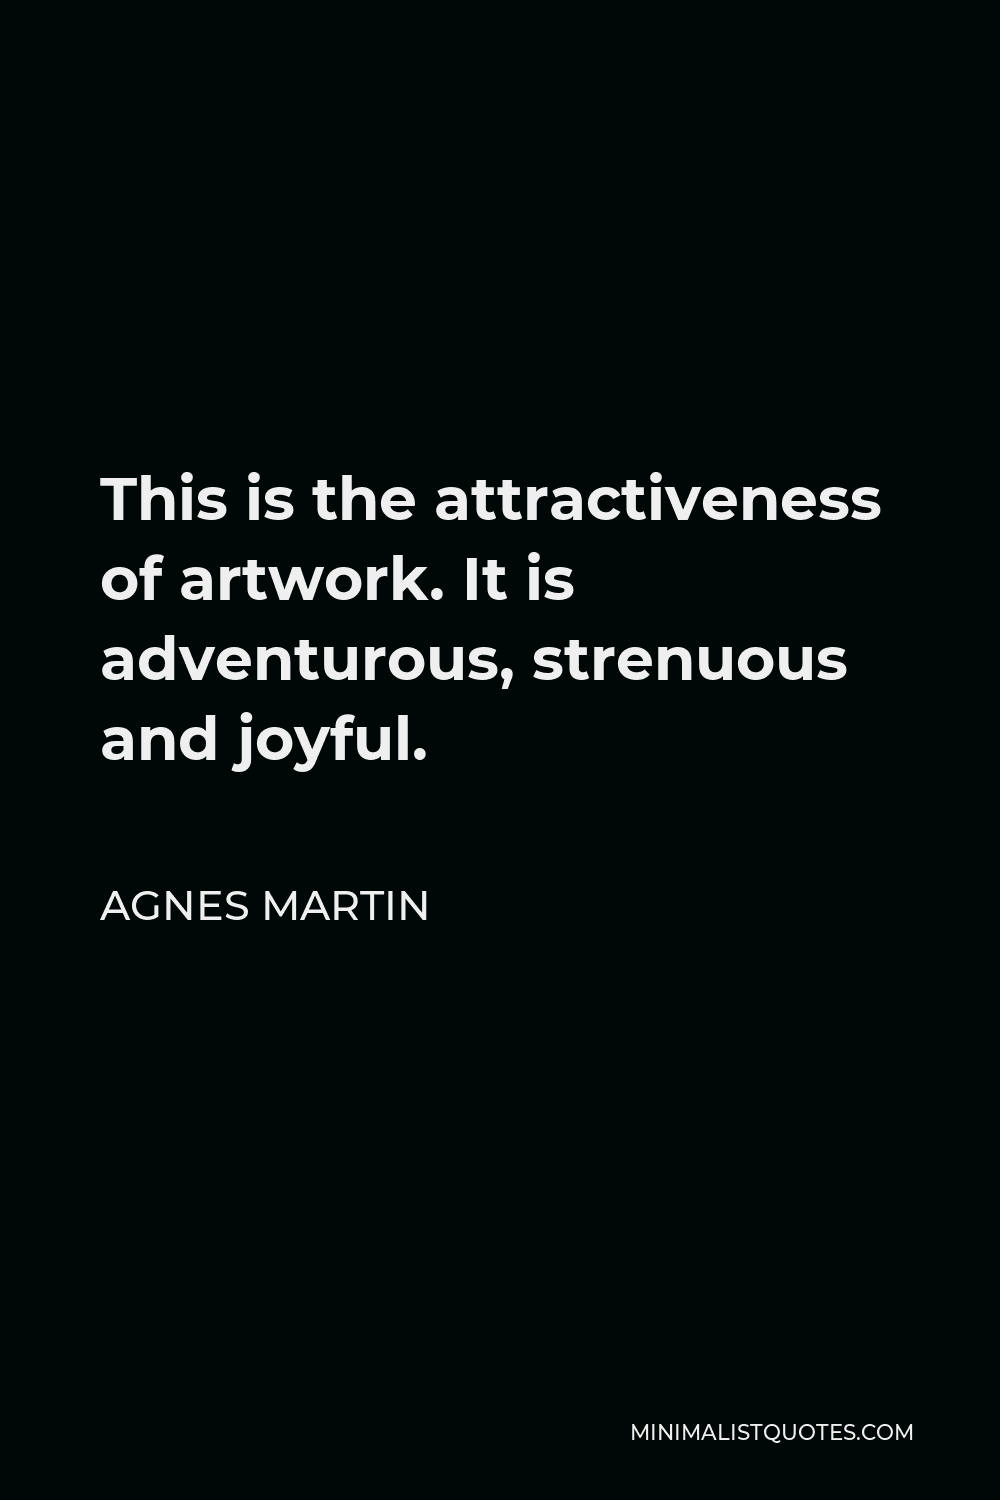 Agnes Martin Quote - This is the attractiveness of artwork. It is adventurous, strenuous and joyful.